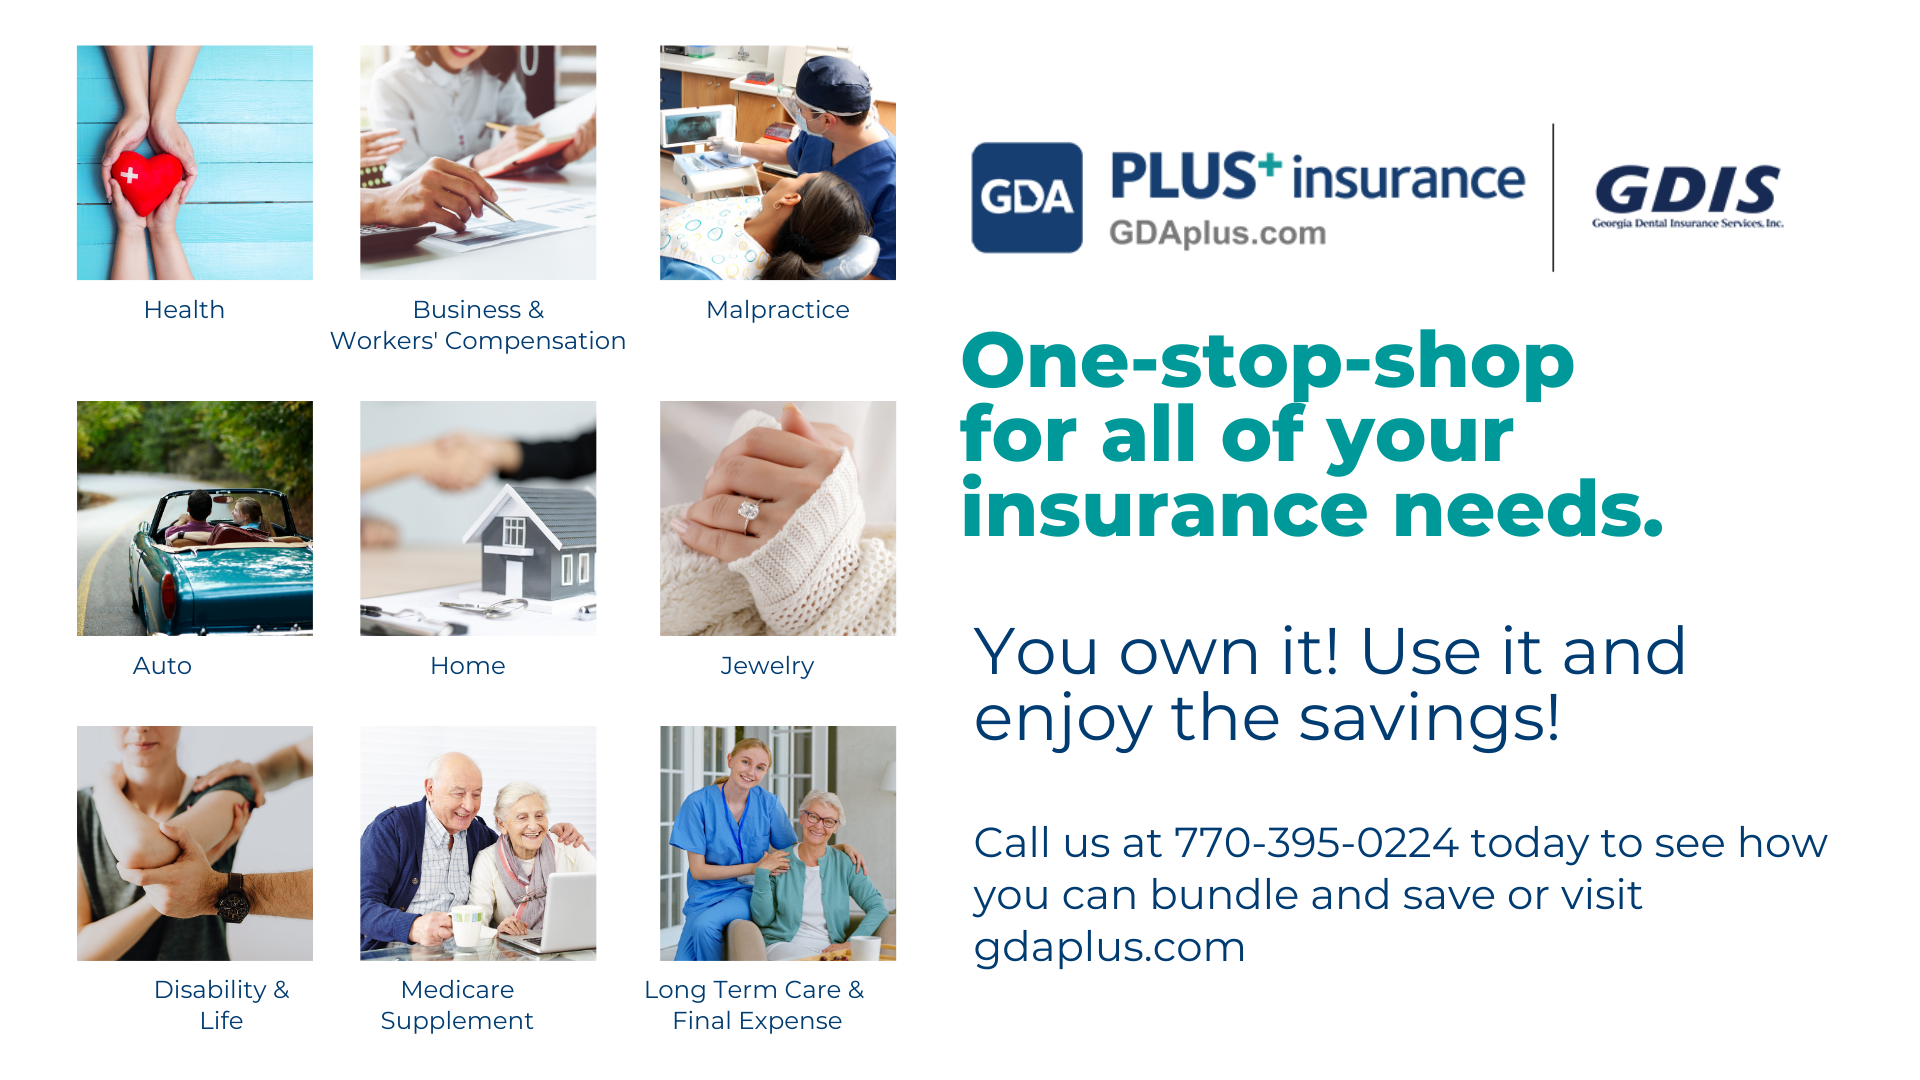 GDIS- One Stop Shop